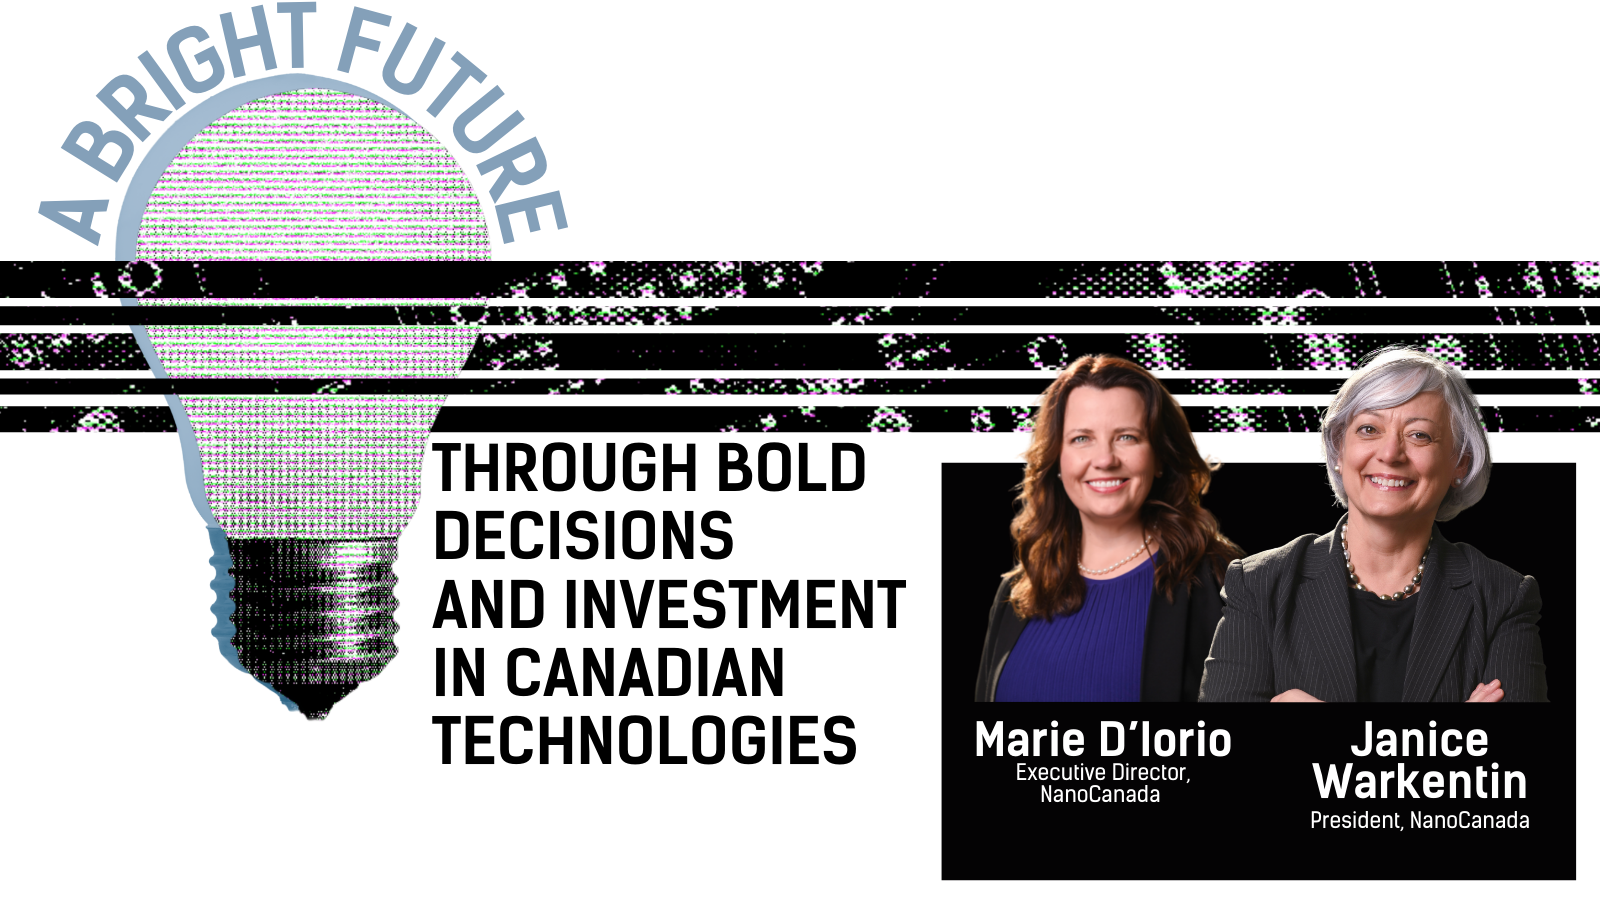 A banner with the title "A bright future through bold decisions and investment in Canadian technologies" followed by the headshot of two white women